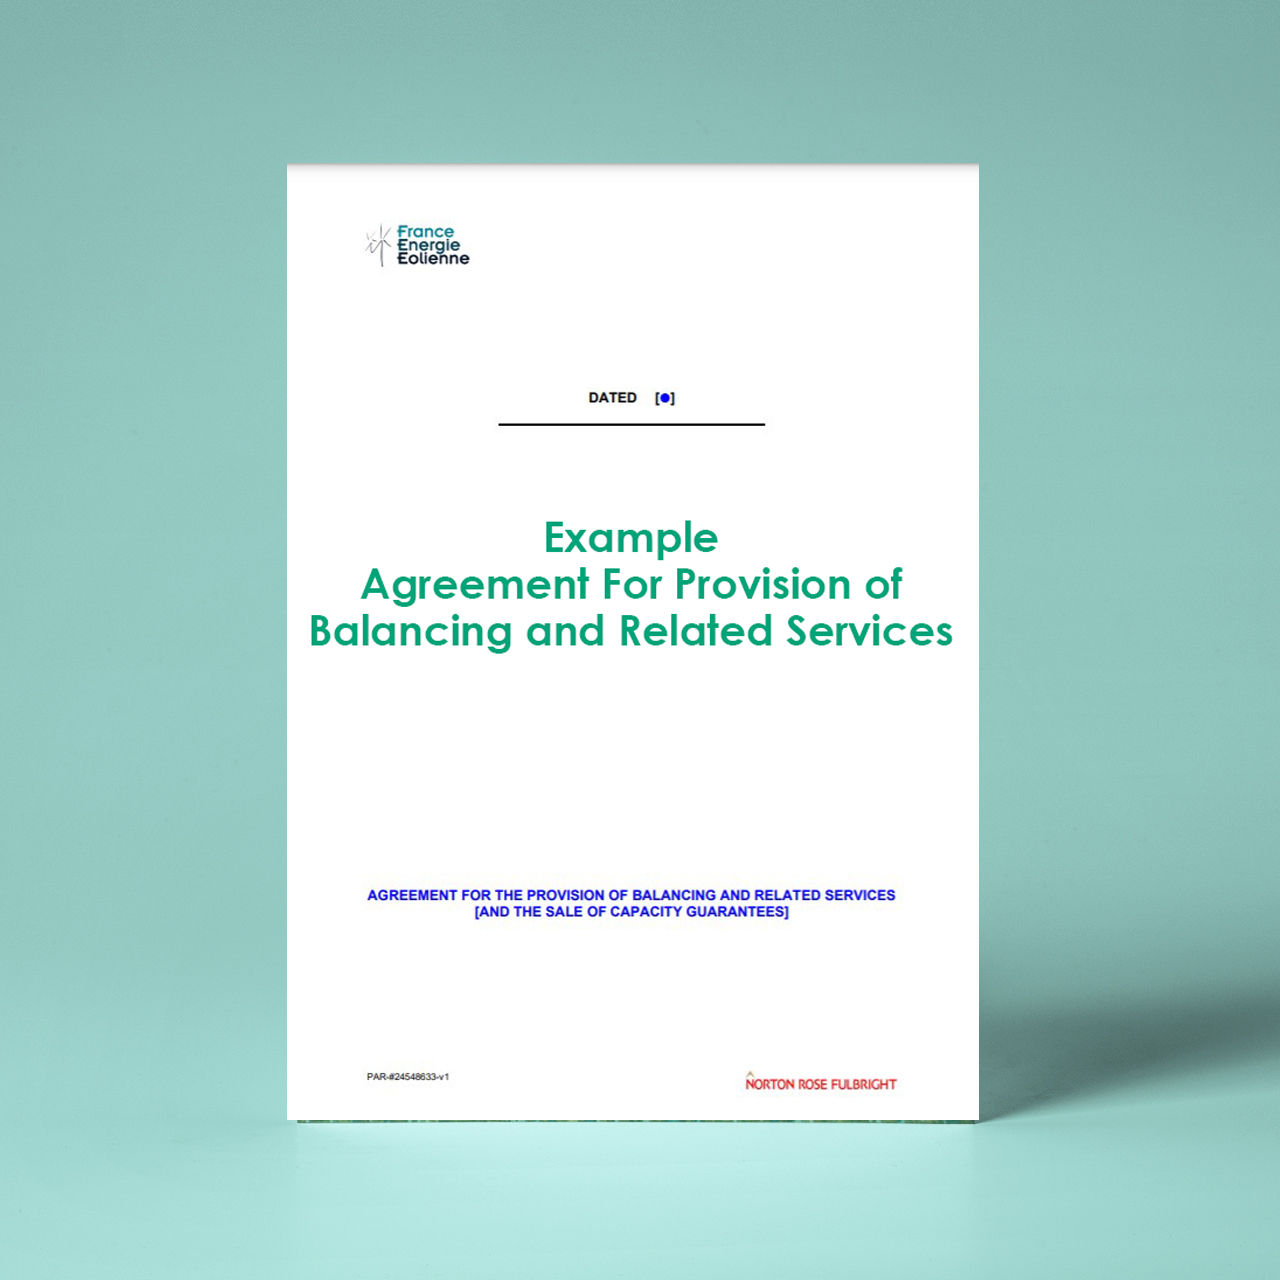 Example Agreement for the Provision of Balancing and Related Services